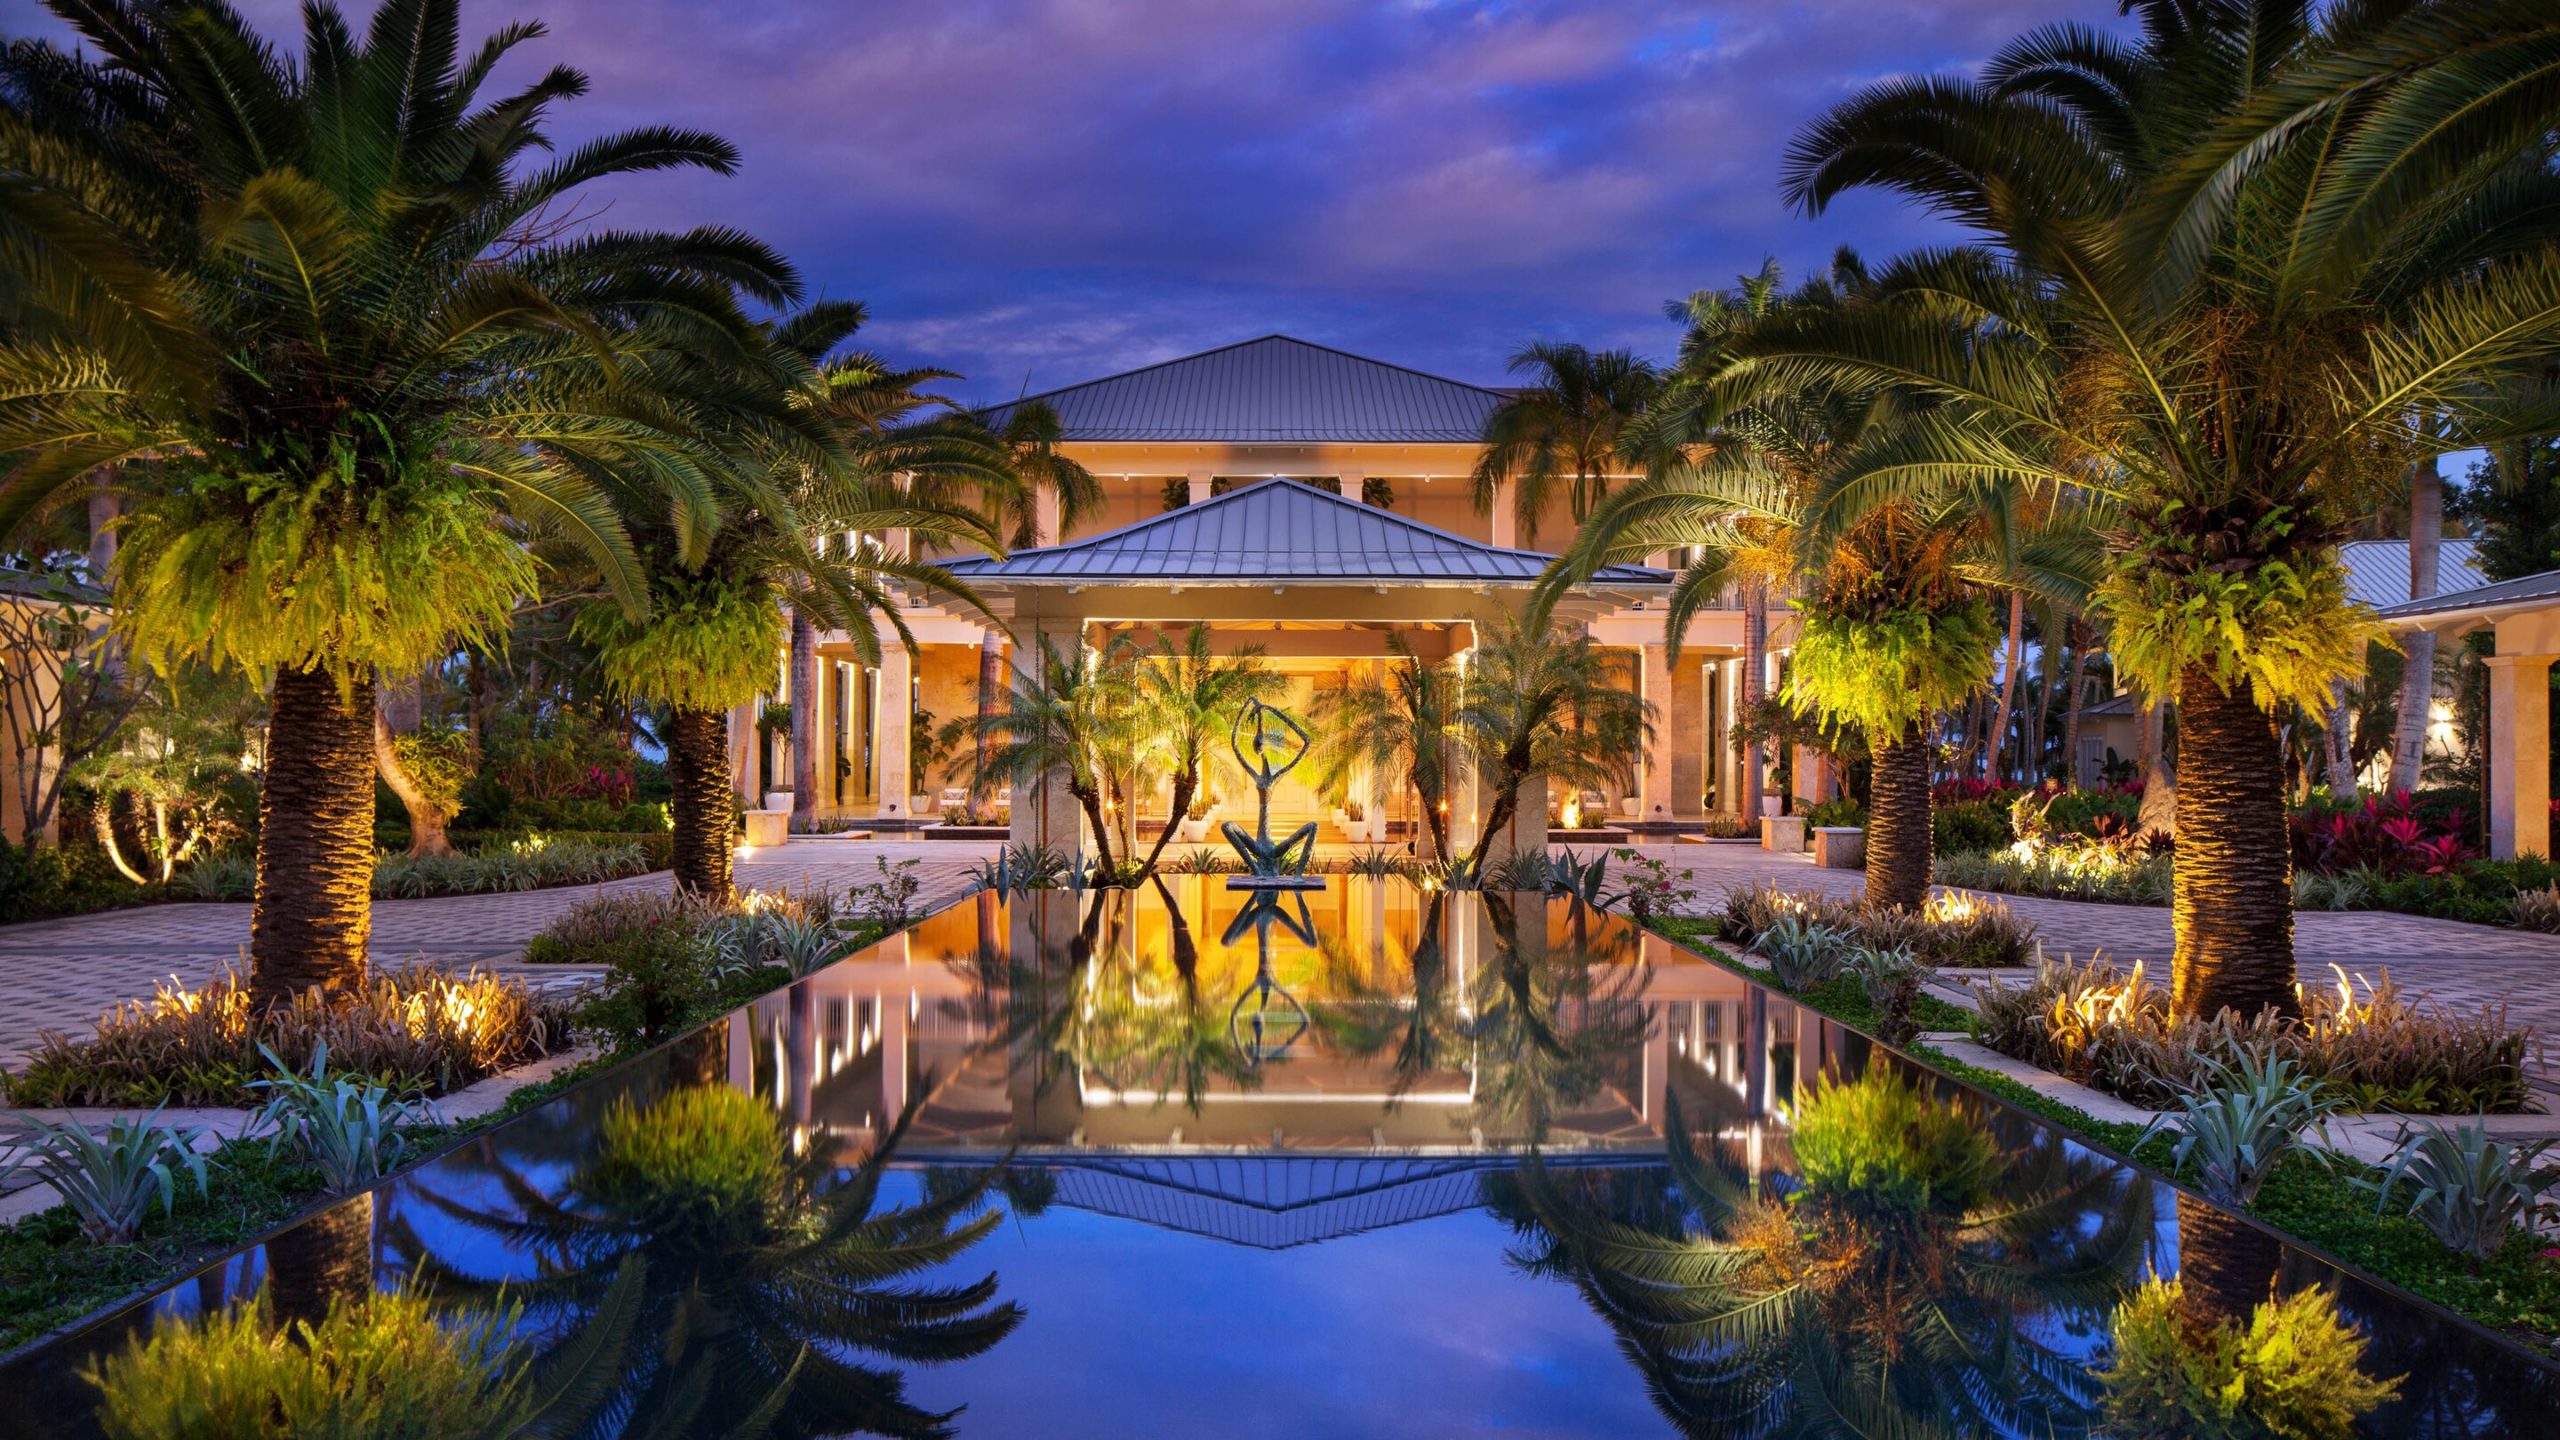 Spa Of The Month: St. Regis Bahia, Puerto Rico - BlackDoctor.org